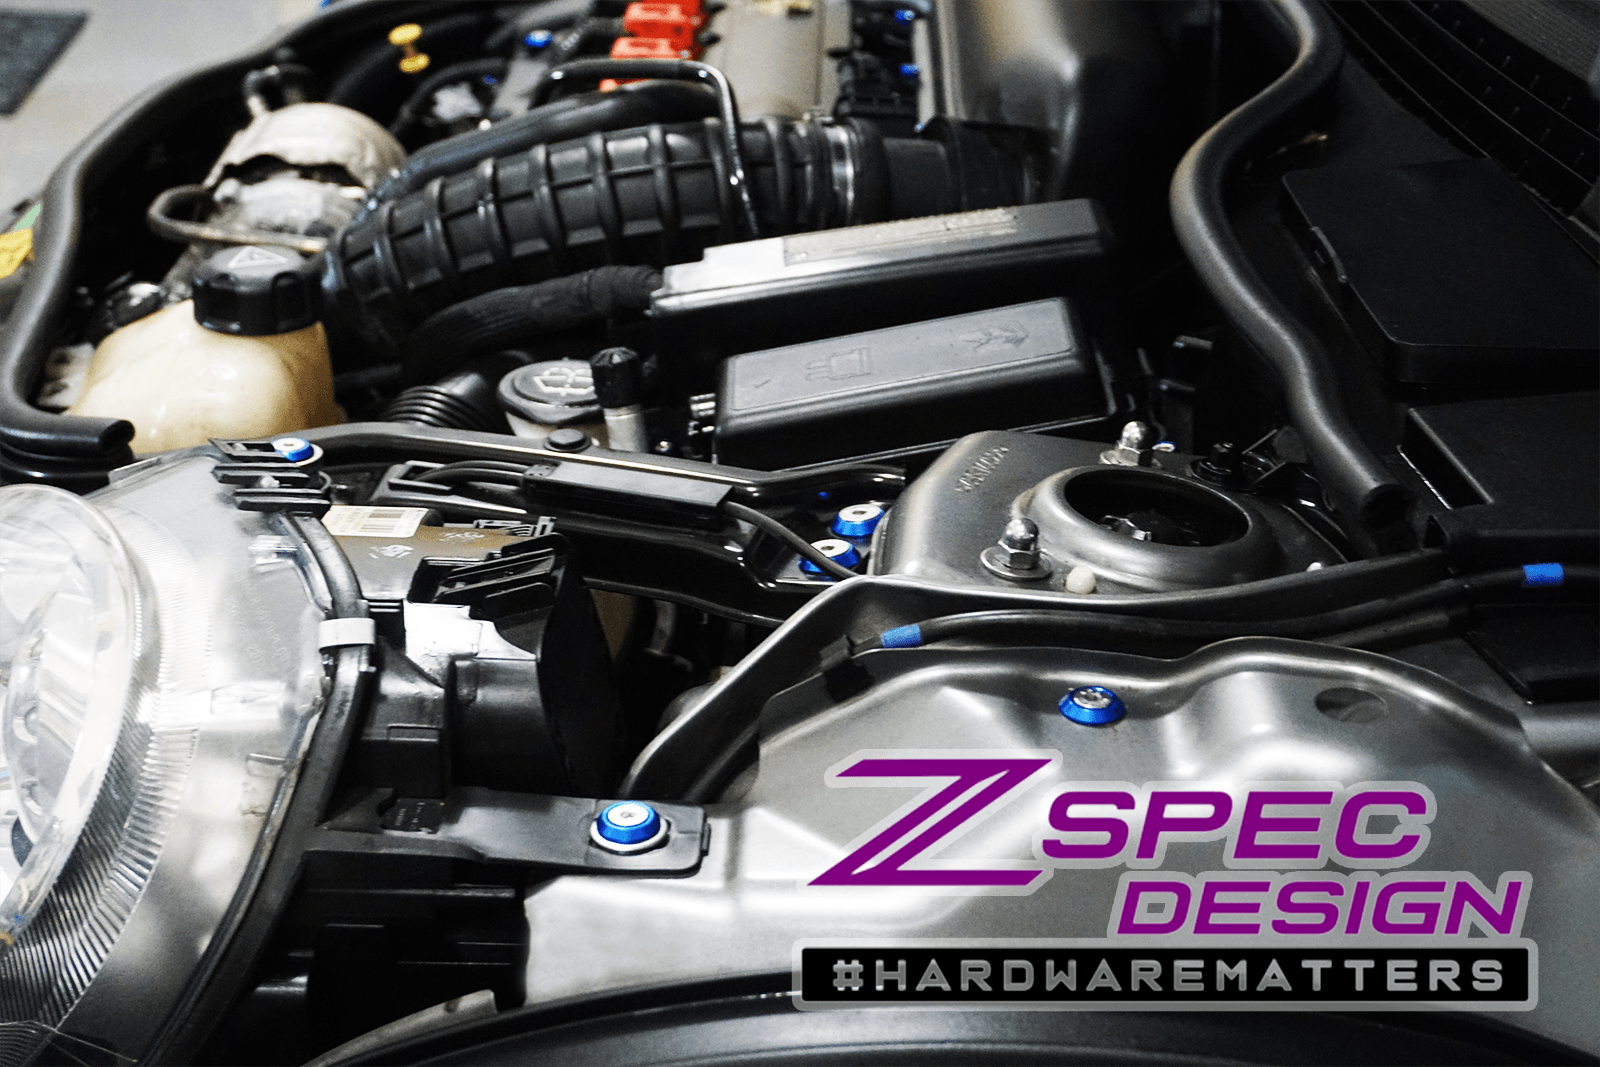 ZSPEC Stage 3 Dress Up Bolts® Fastener Kit for '07-14 Mini Clubman R55 by ZSPEC Design dress up bolts washers beauty bolts socket cap red blue black purple gold gunmetal grey white green peach  Engine Bay Upgrade Performance